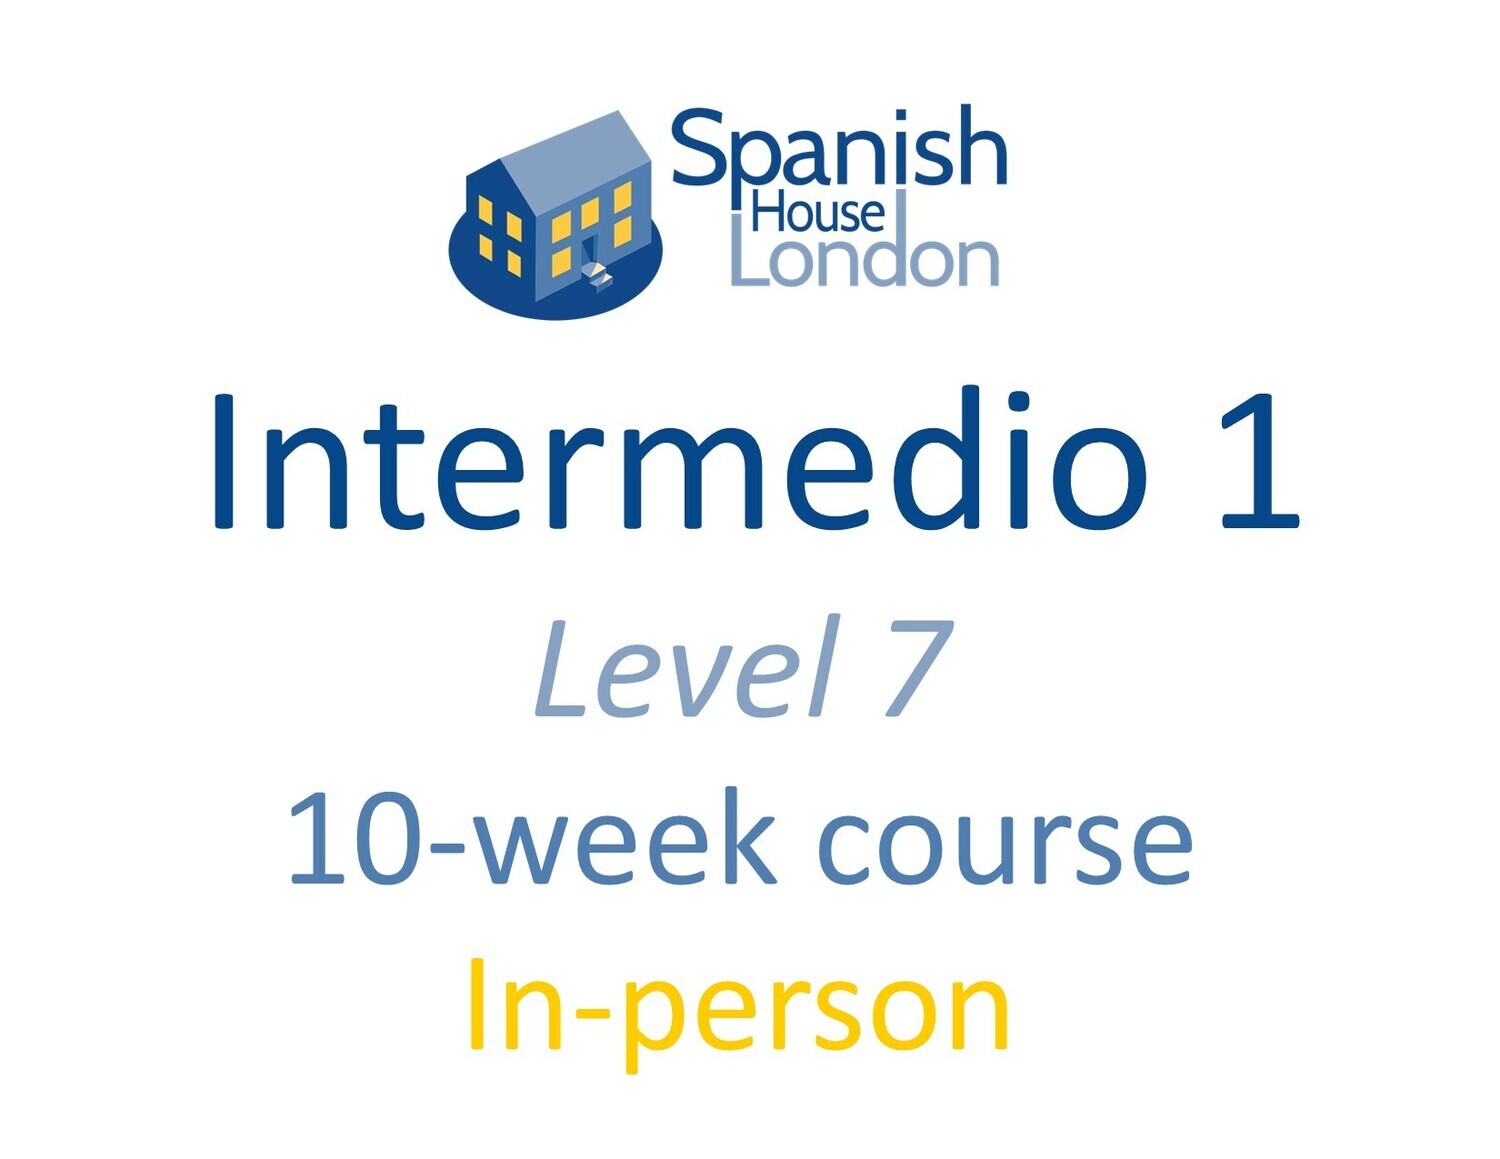 Intermedio 1 Course starting on 31st January at 6pm in Clapham North